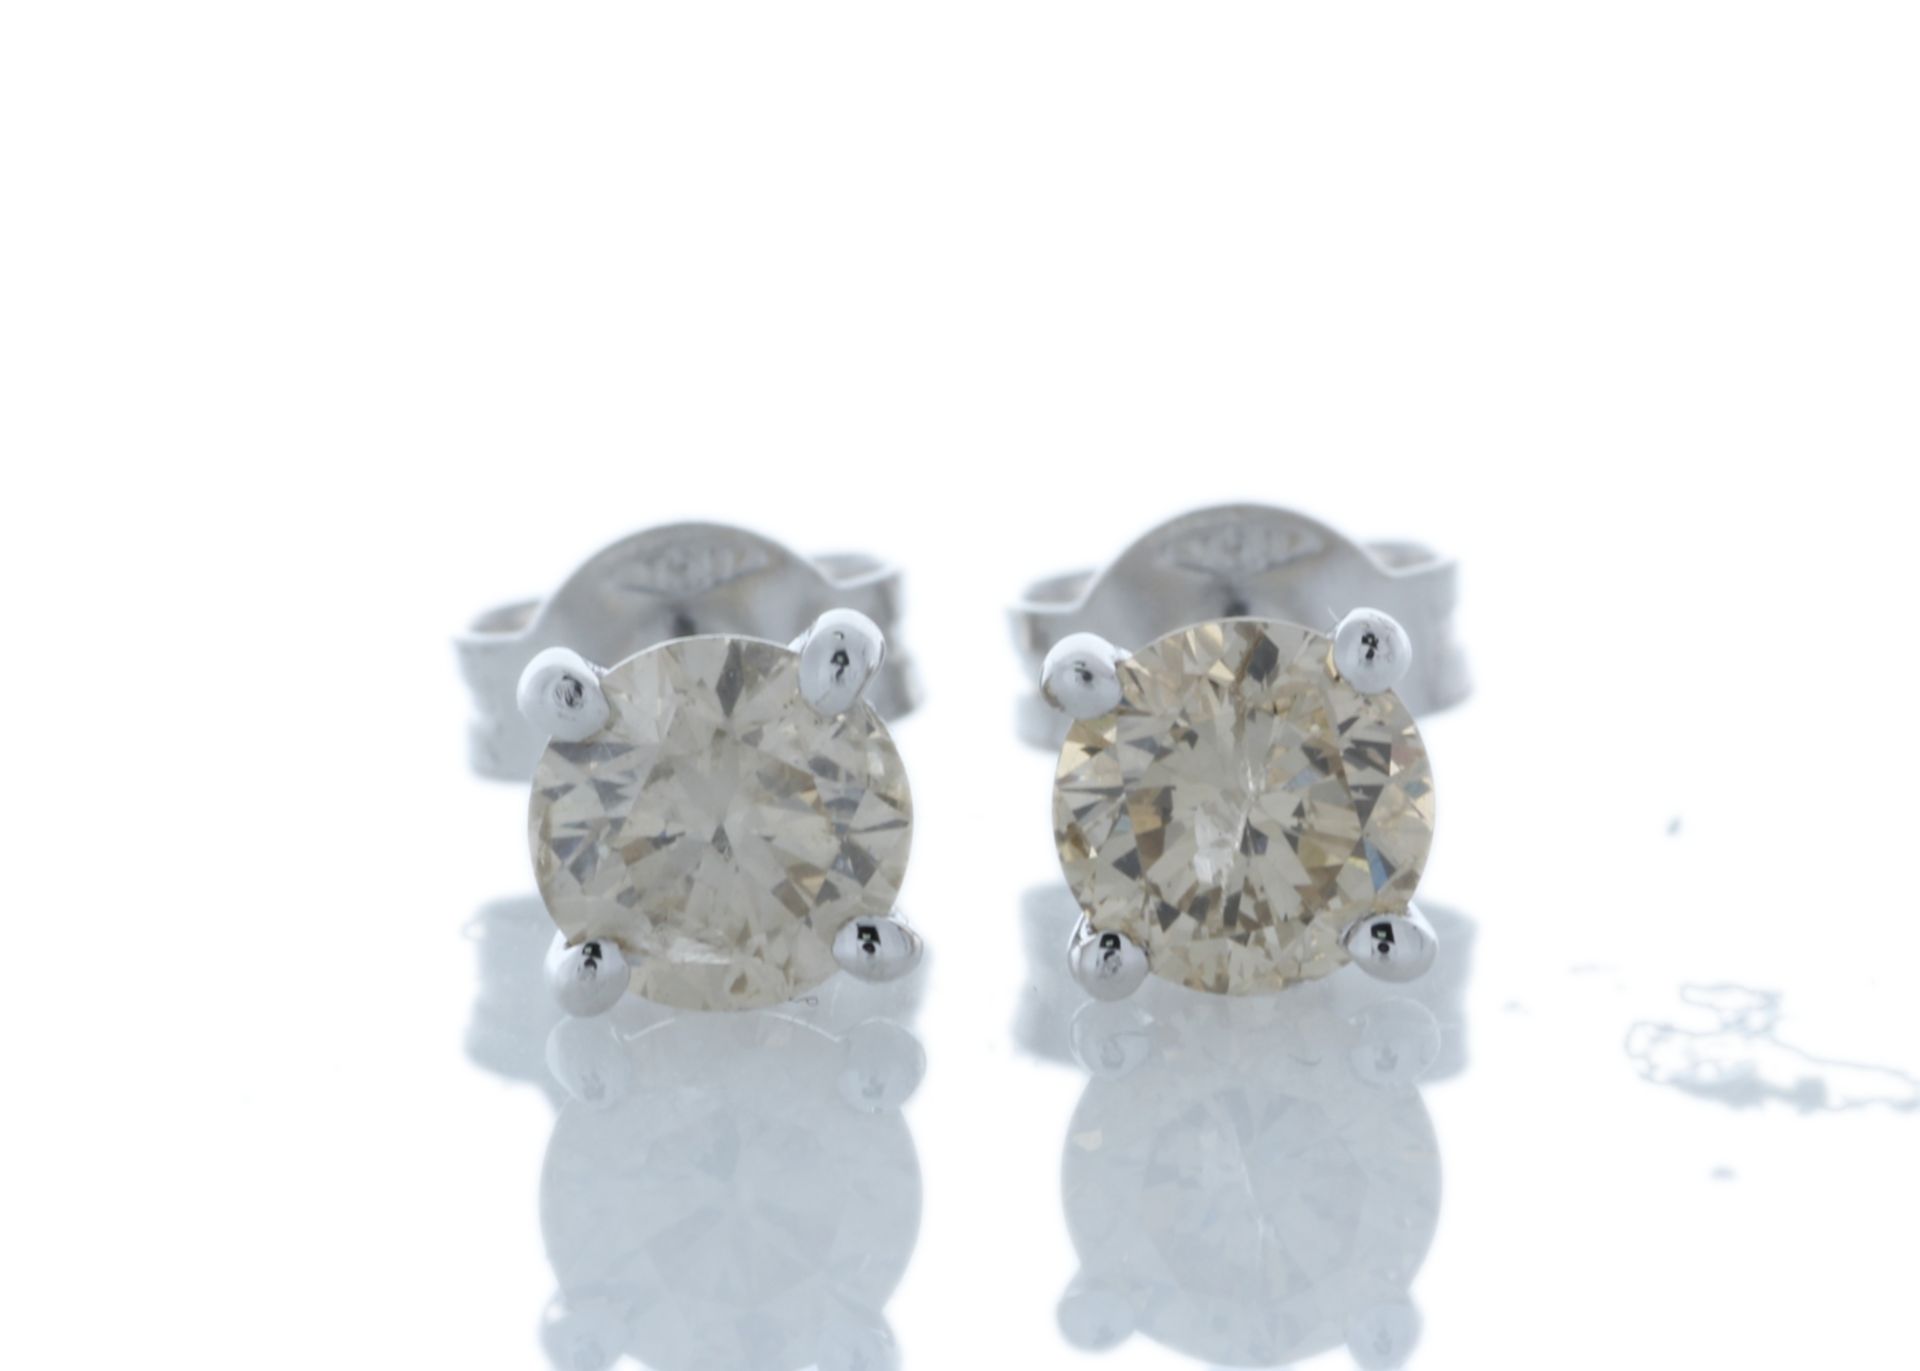 18ct White Gold Single Stone Prong Set Diamond Earring 1.22 Carats - Valued by GIE £8,540.00 -